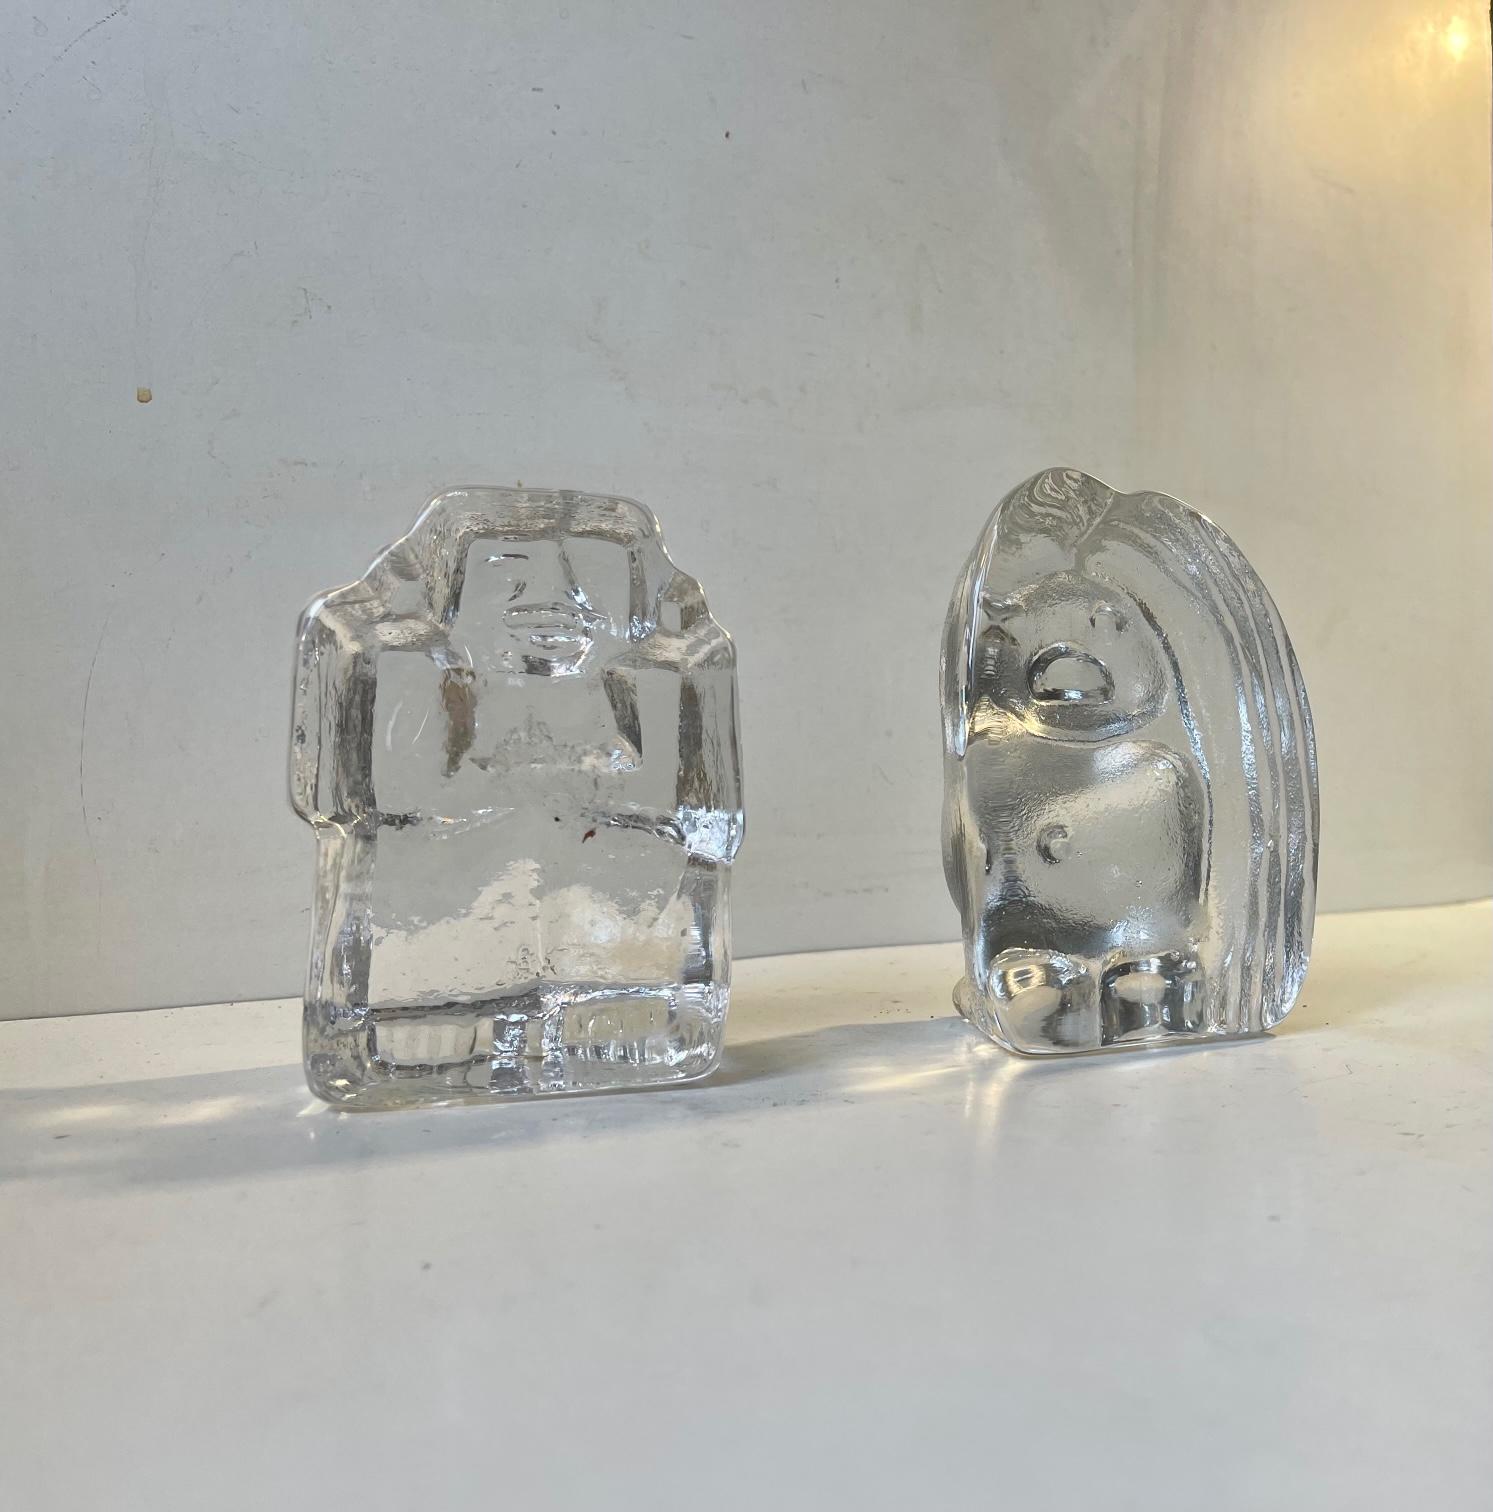 A cute couple of heavy ice glass figurines or bookends (Flat backs) The female Troll with long hair was designed by Peter Johansen and manufactured by Bergdala Glasbruk in Sweden during the late 1960s or early 1970s. The monkey or man was designed